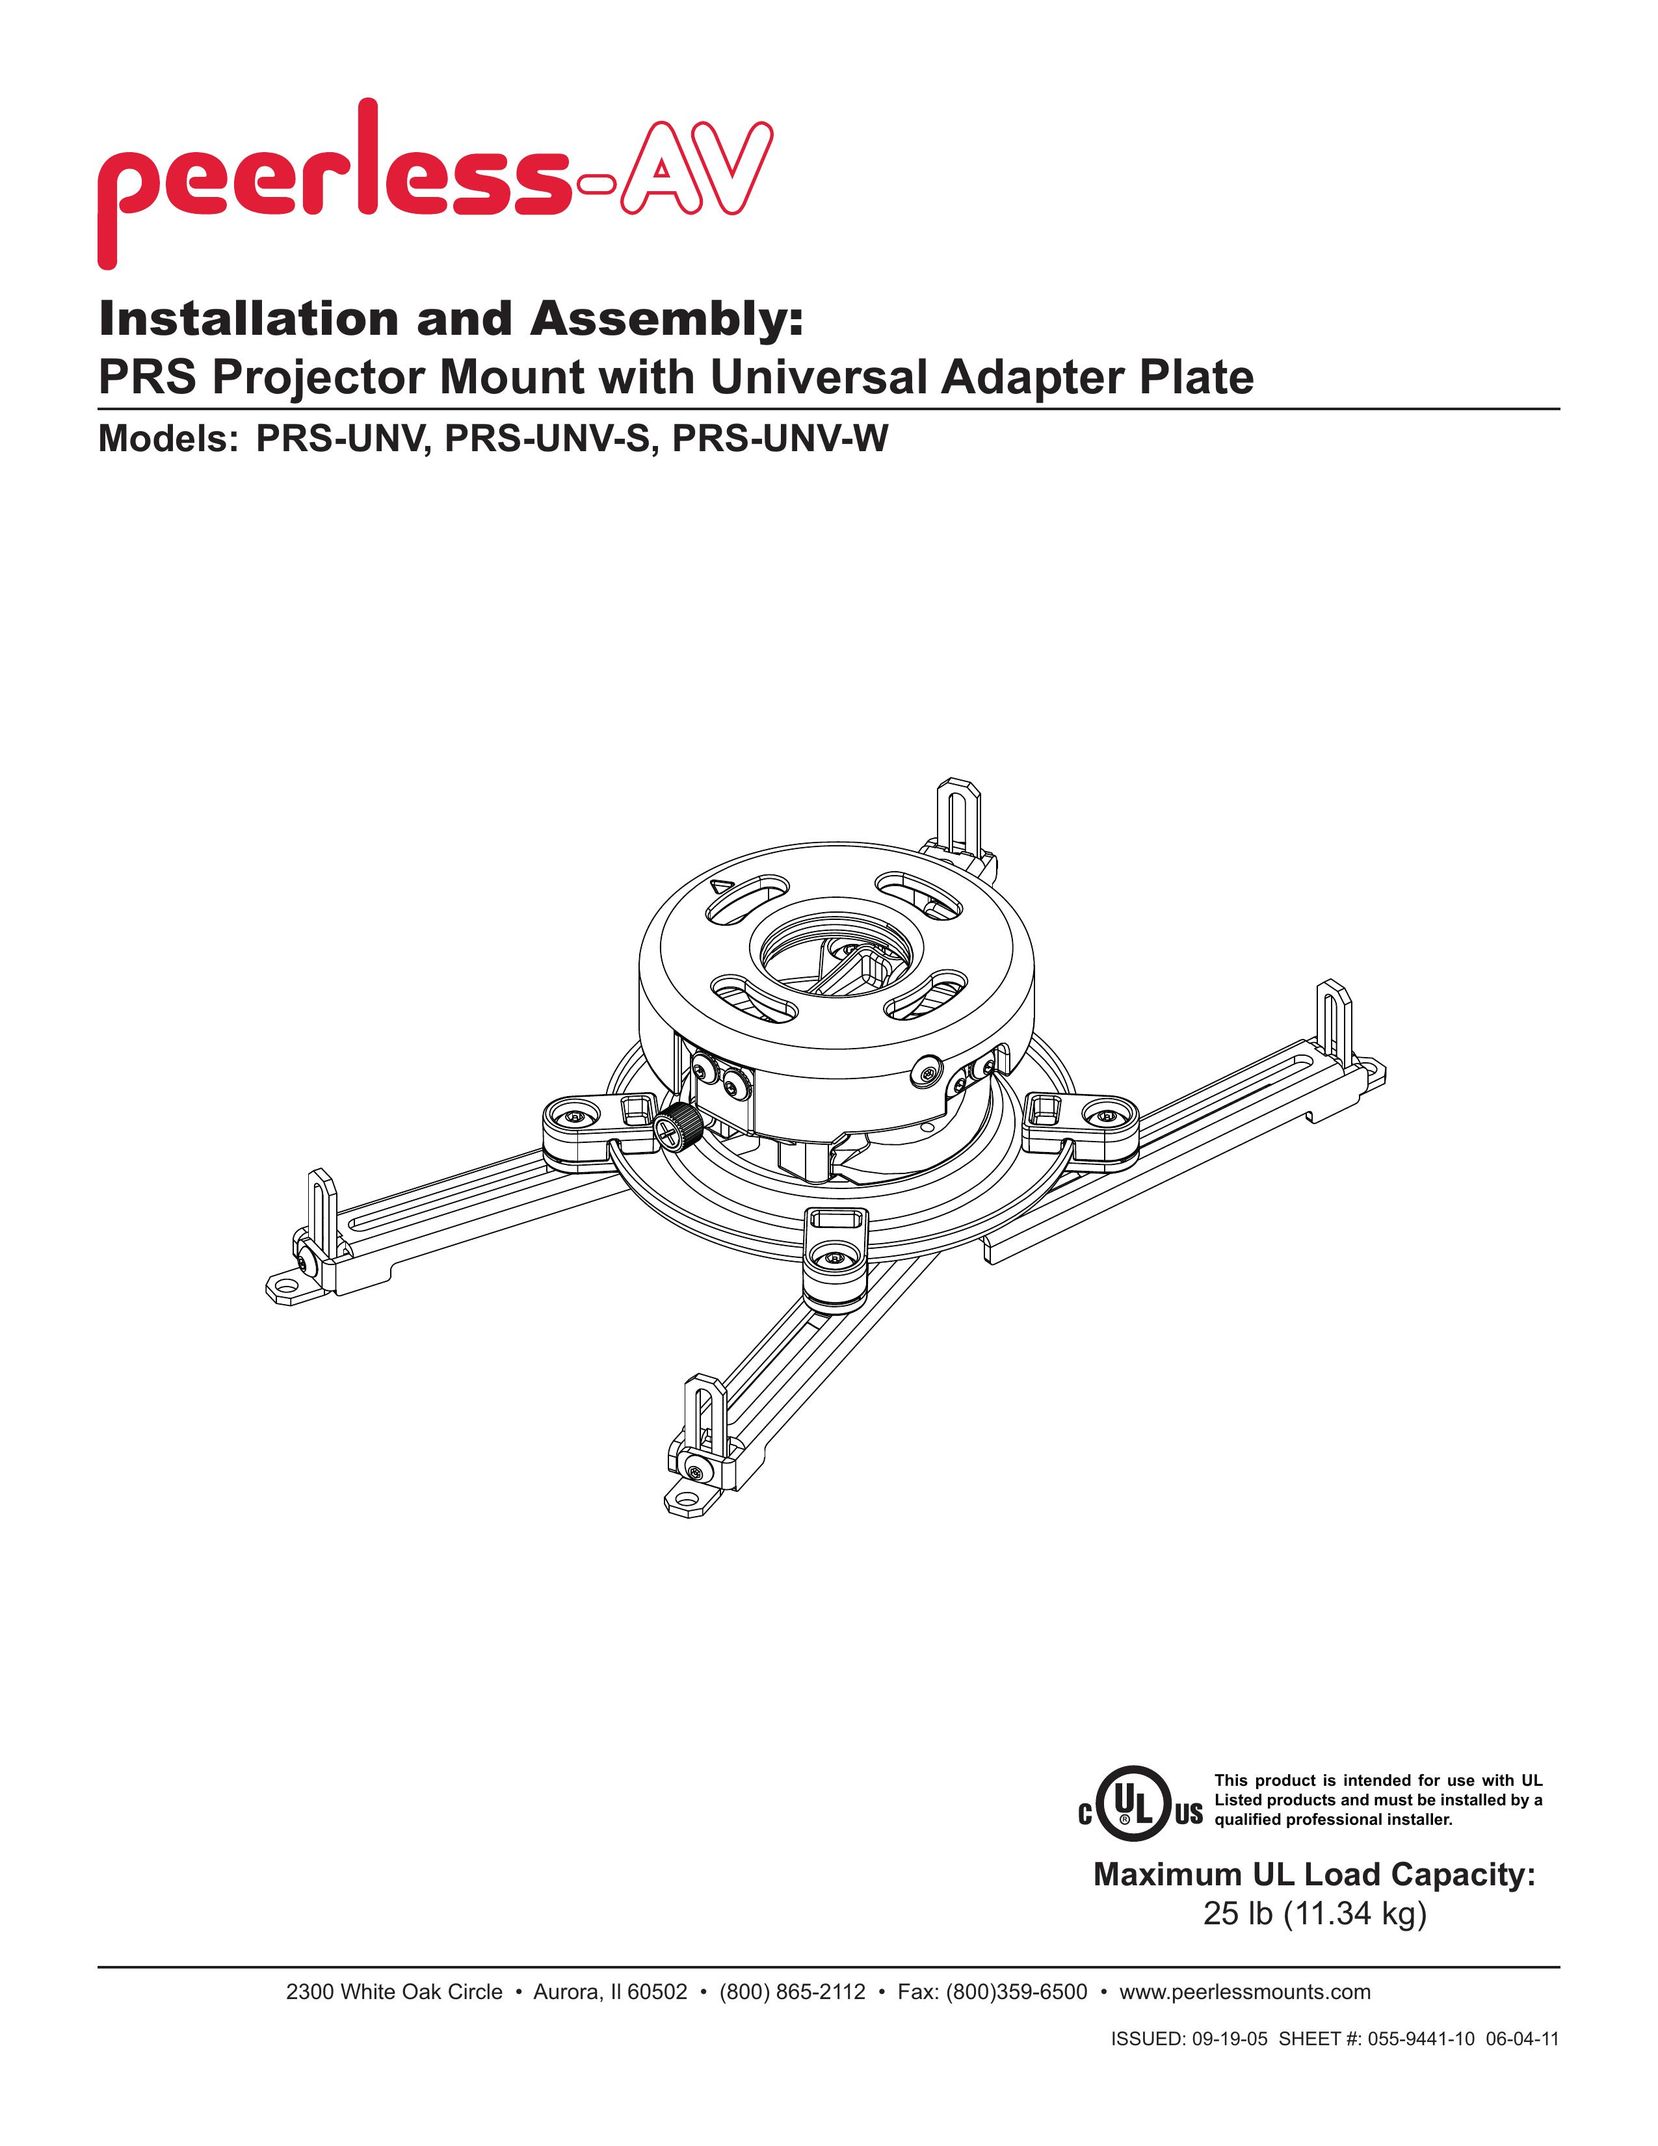 Peerless Industries PRS-UNV-W Projector Accessories User Manual